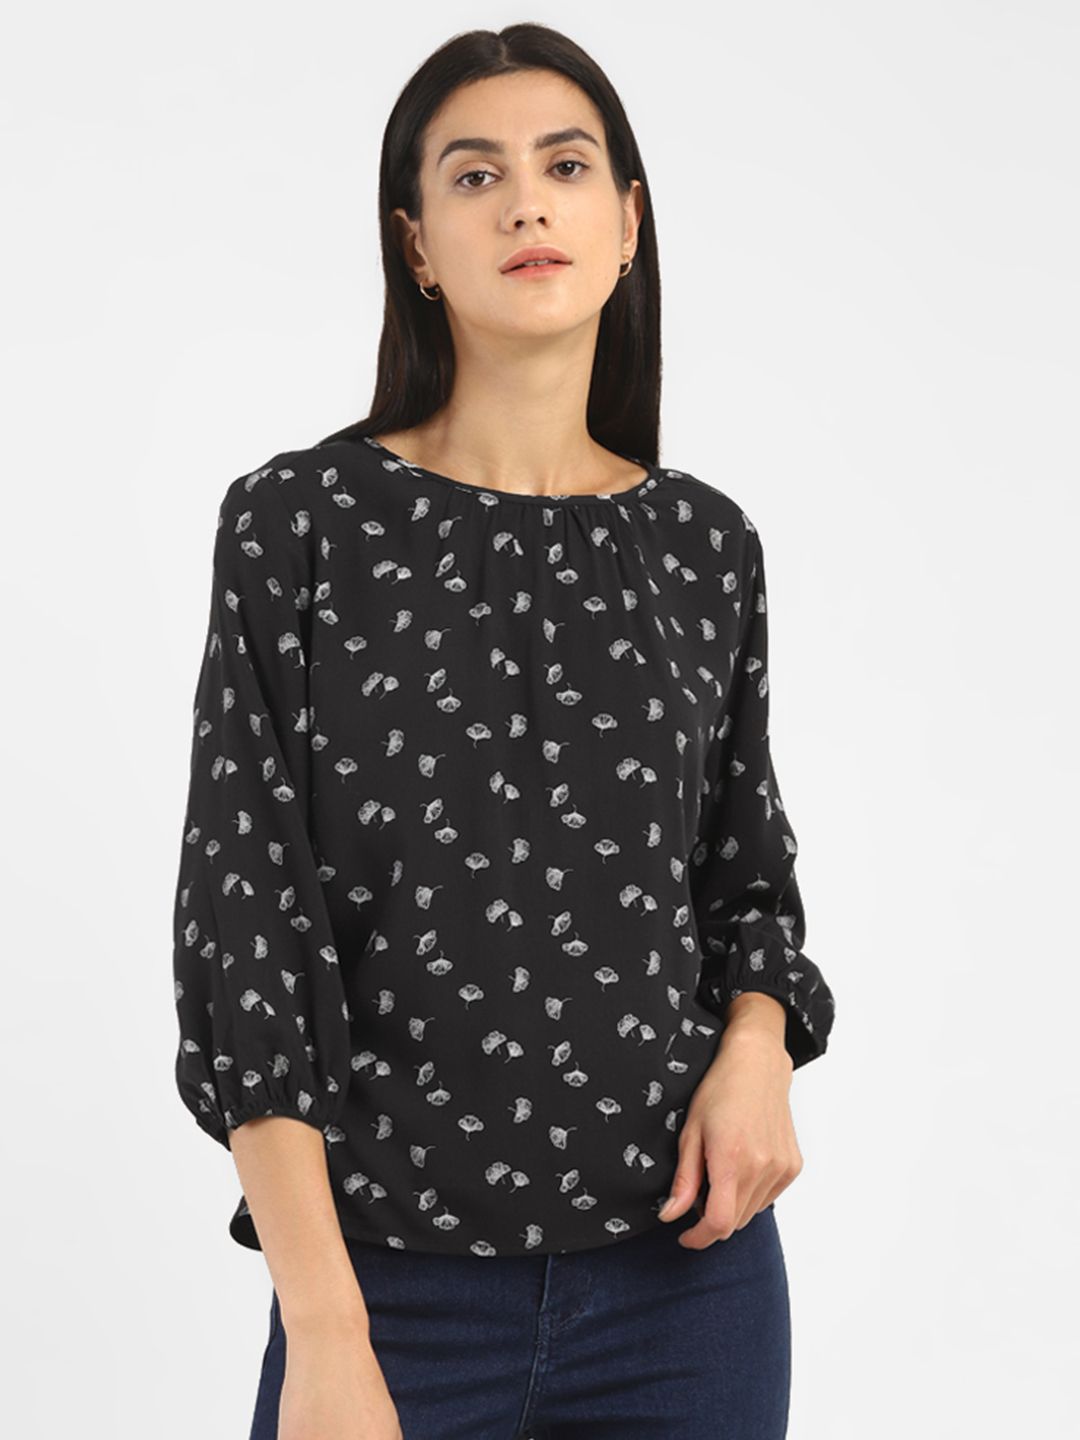 Levis Floral Printed Top Price in India